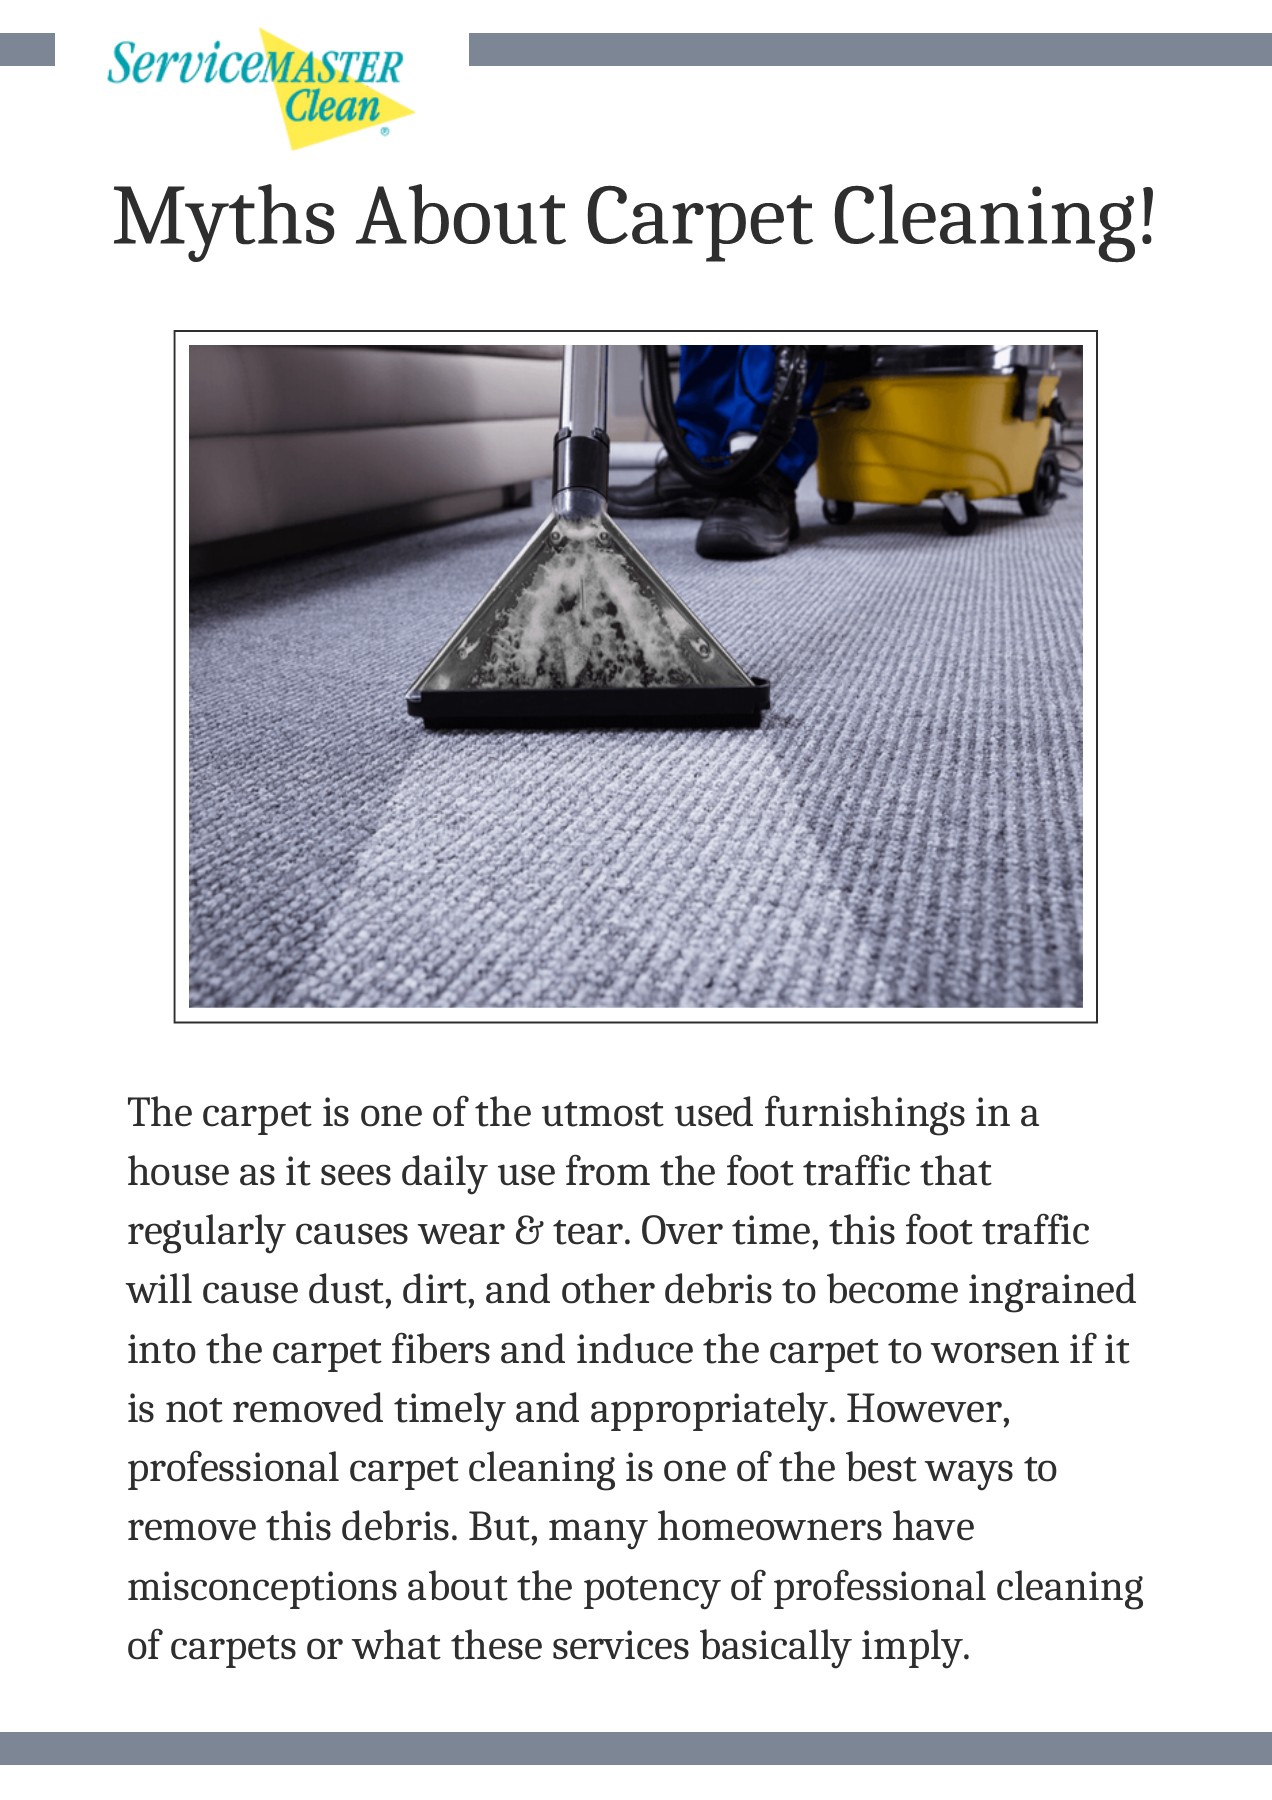 In-depth Guide In Addressing Common Misconceptions Of Carpet Cleaning